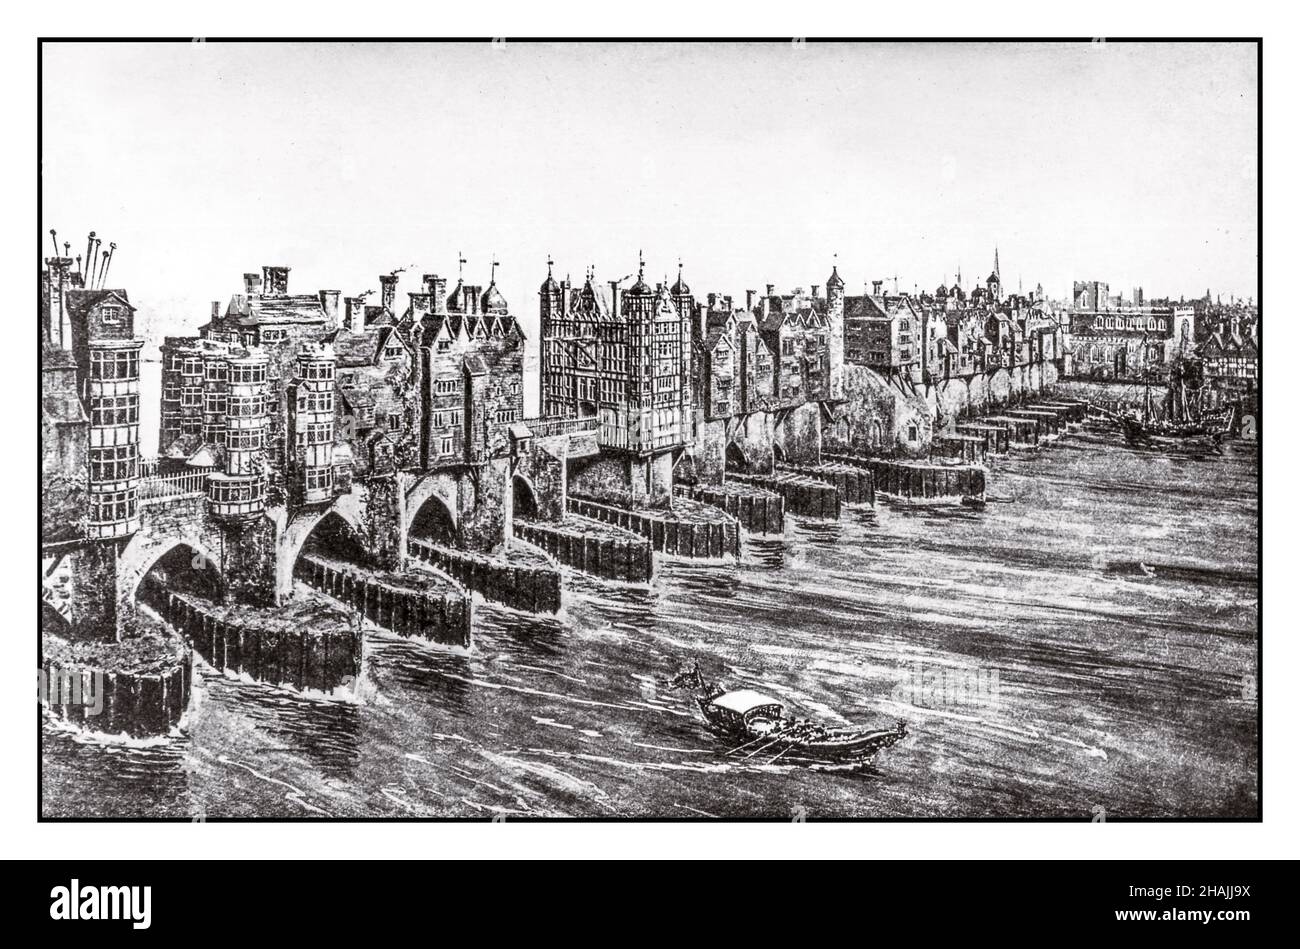 Archive London Bridge illustration River Thames 1660s before the Great Fire of London in 1660s; River Thames London UK 17th Century Stock Photo